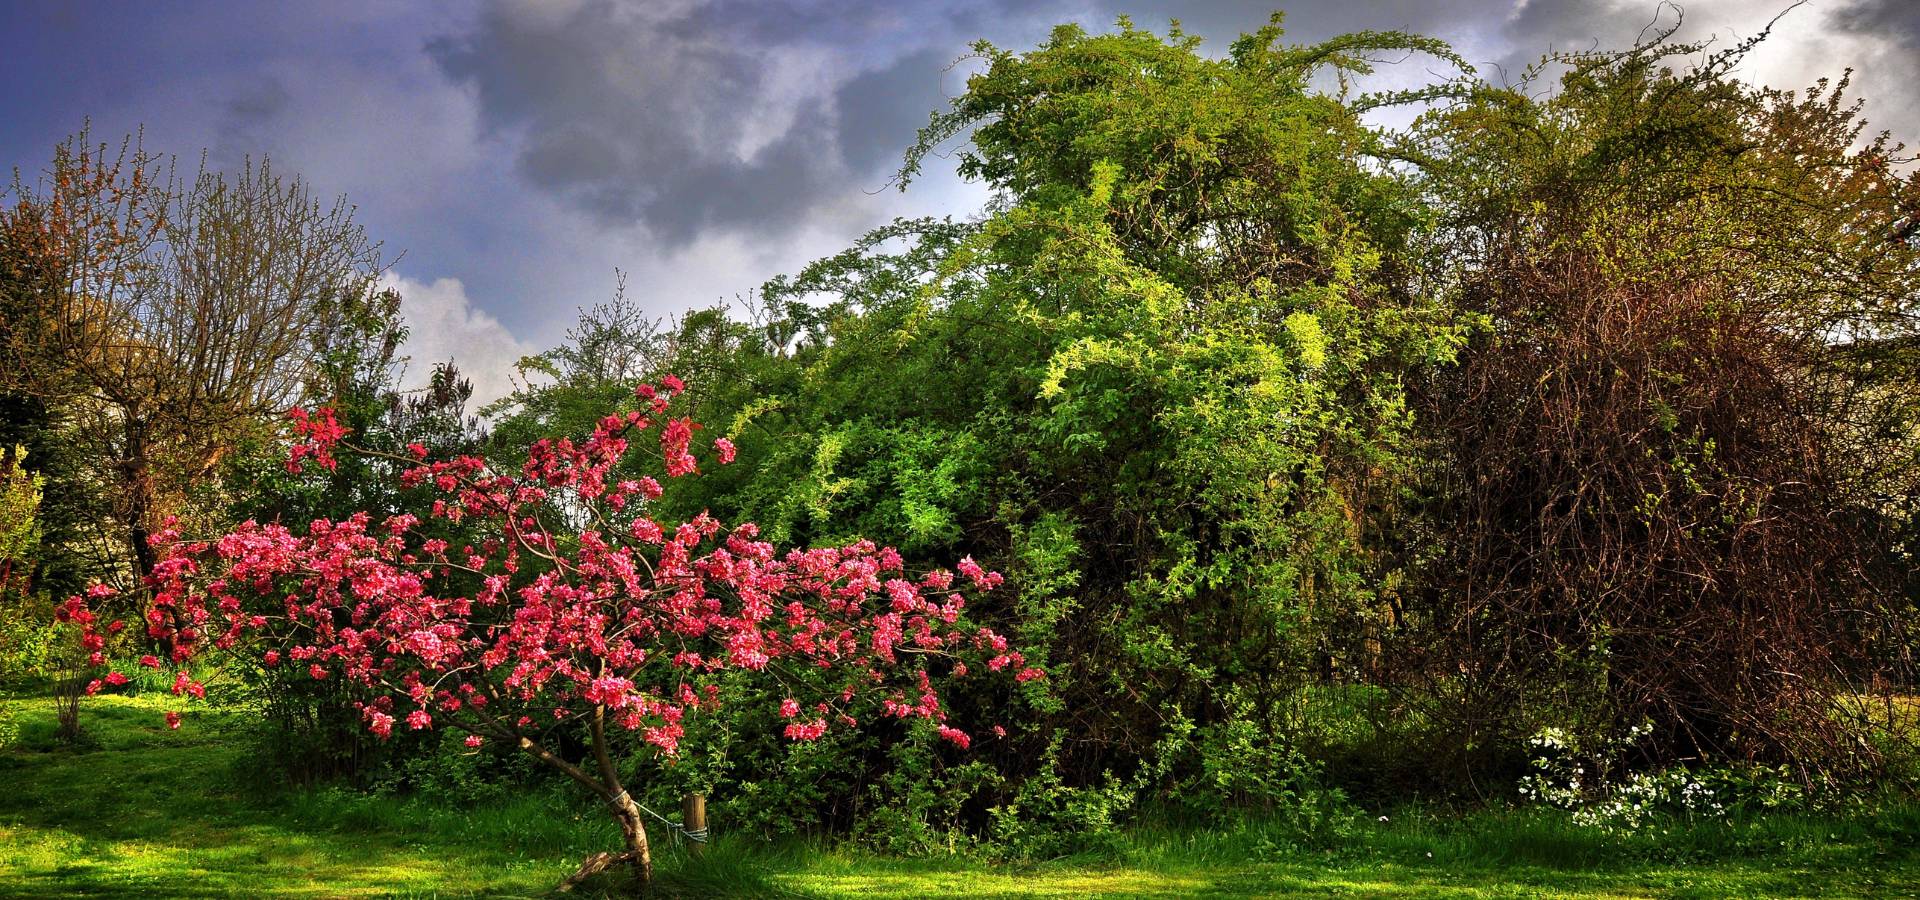 A stand of lush green trees with a pink-flowering paradise apple tree in the foreground demonstrating why trees need fertilizer.